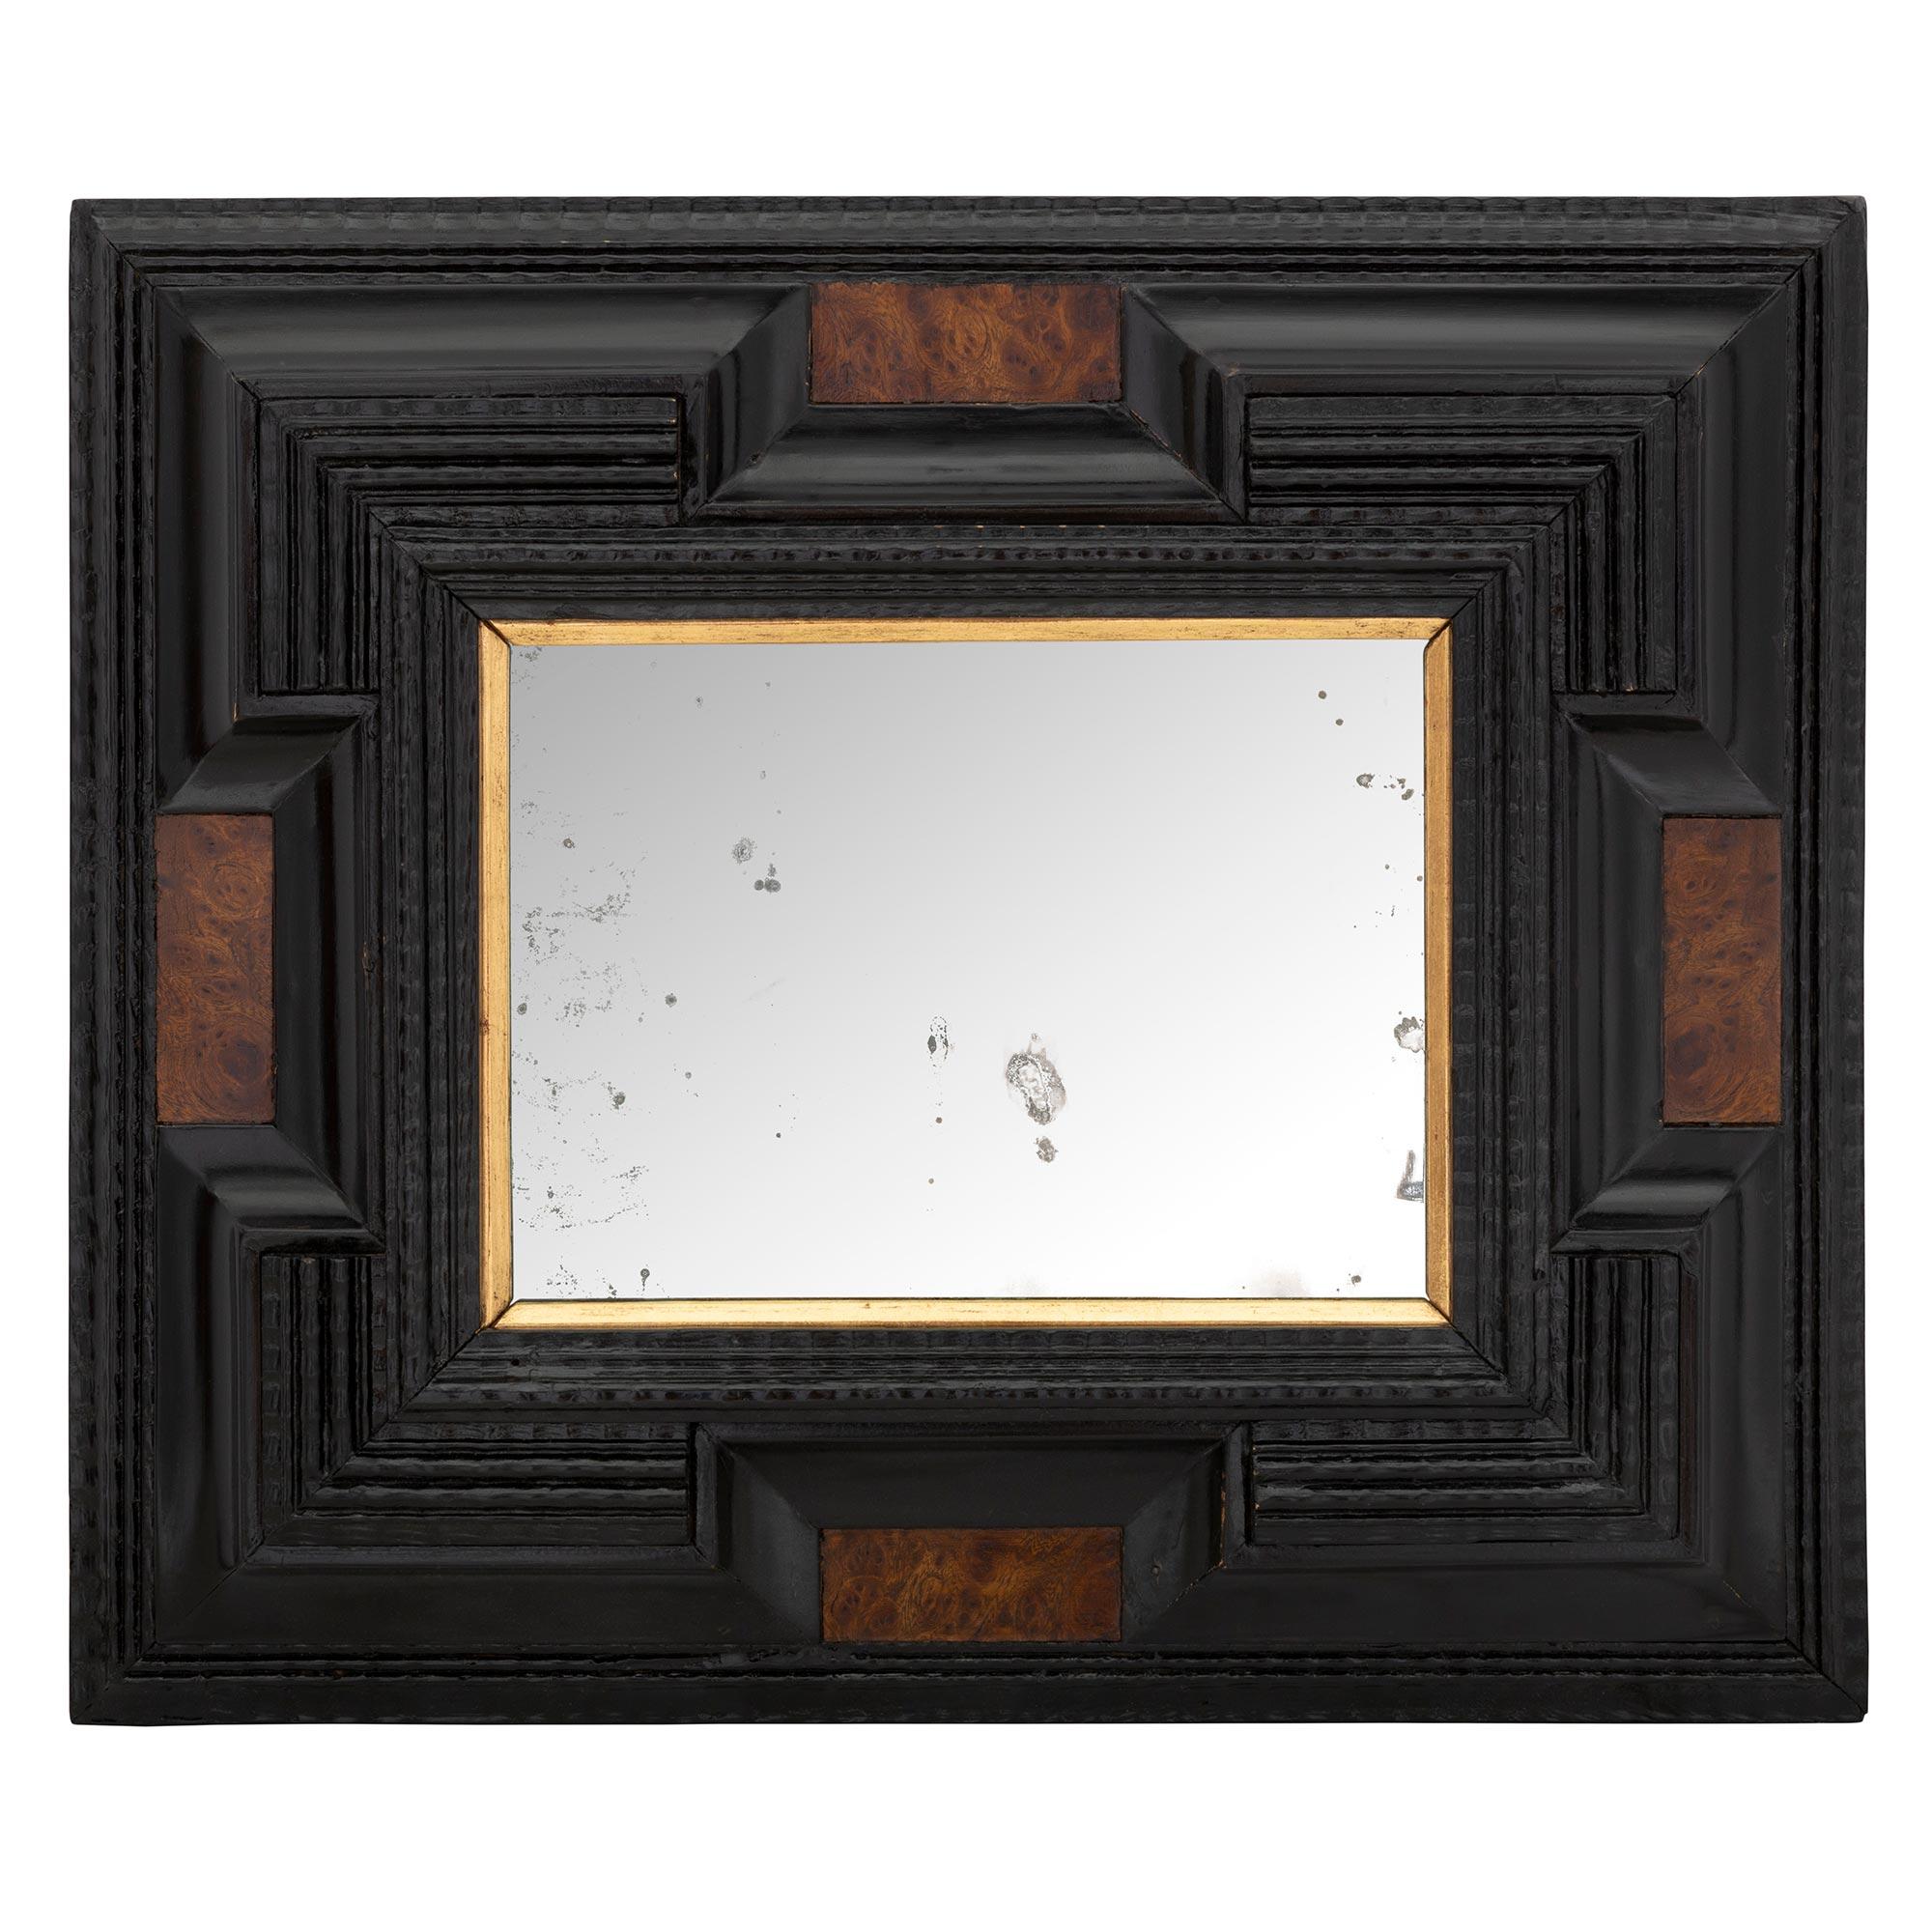 A striking and most charming pair of Italian early 18th century ebony, burl walnut, and giltwood Florentine mirrors. Each mirror retains its original mirror plate set within a fine giltwood band and impressive ebony frame with a striking and